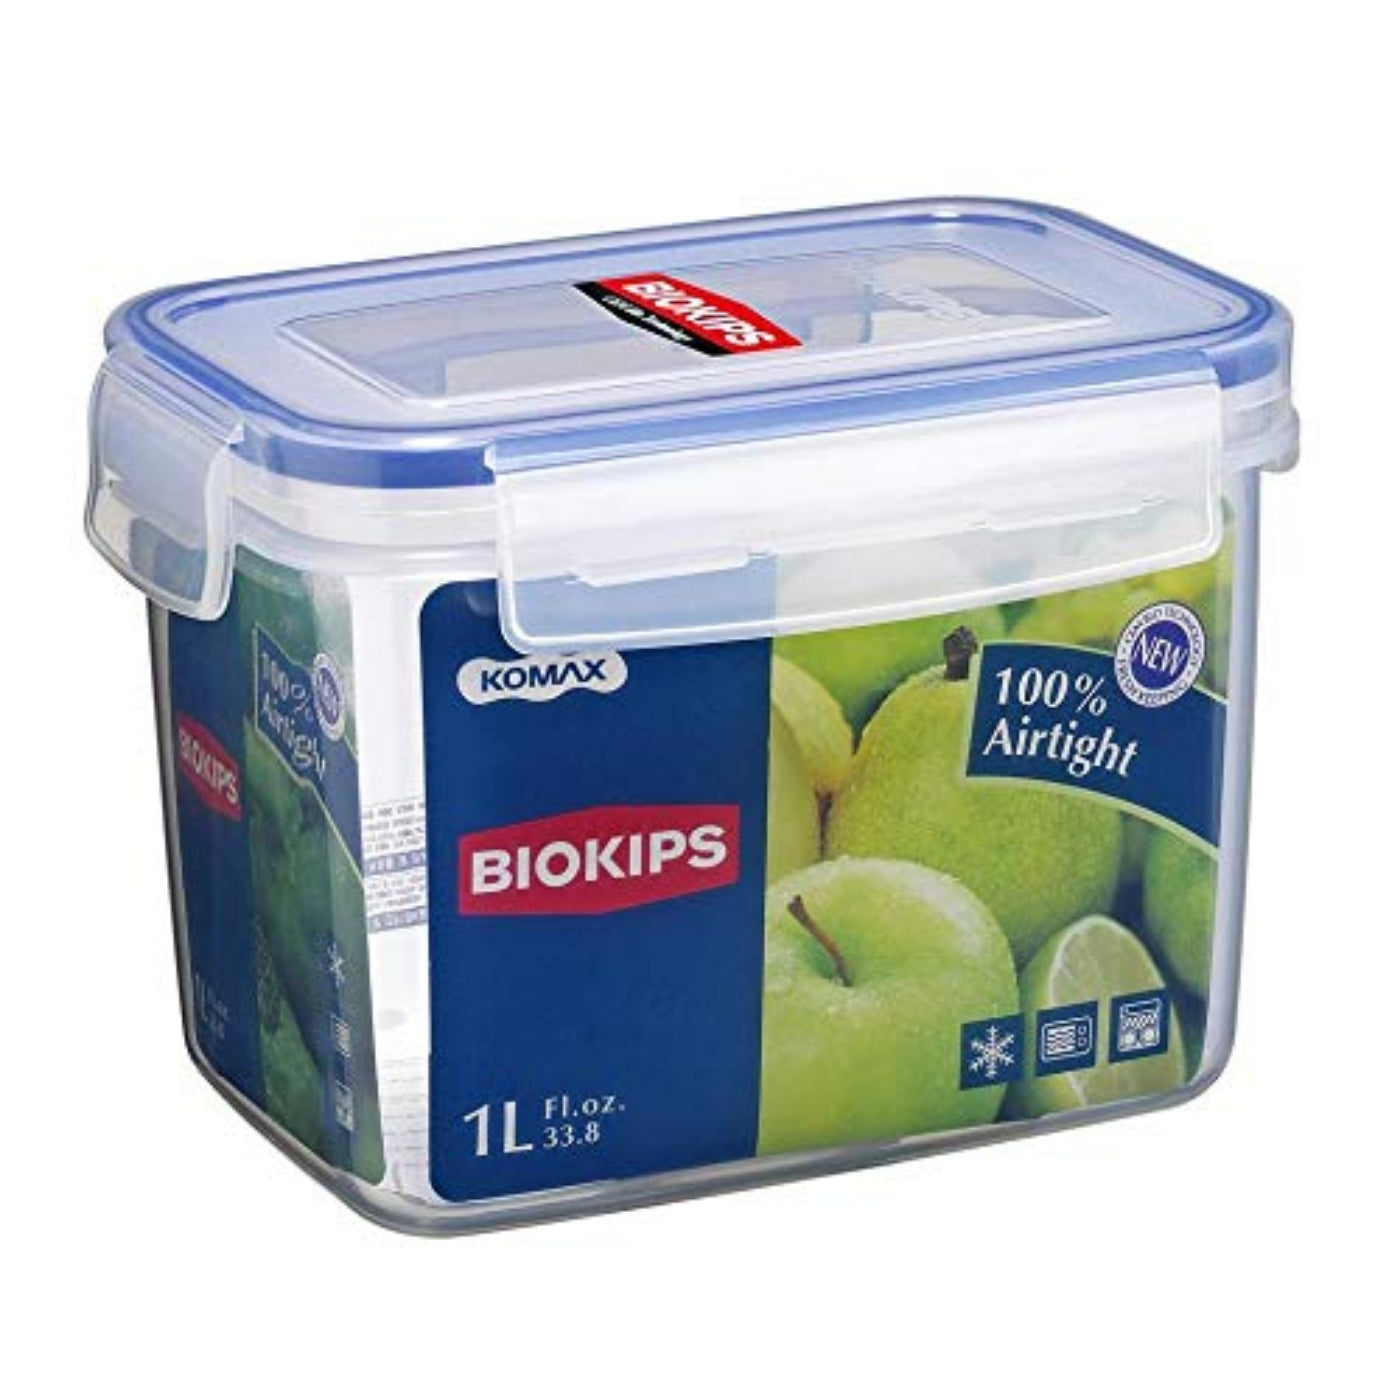 Komax Biokips Sandwich Containers (Set of 3) – Airtight Food Storage  Containers – BPA-Free Lunch Con…See more Komax Biokips Sandwich Containers  (Set